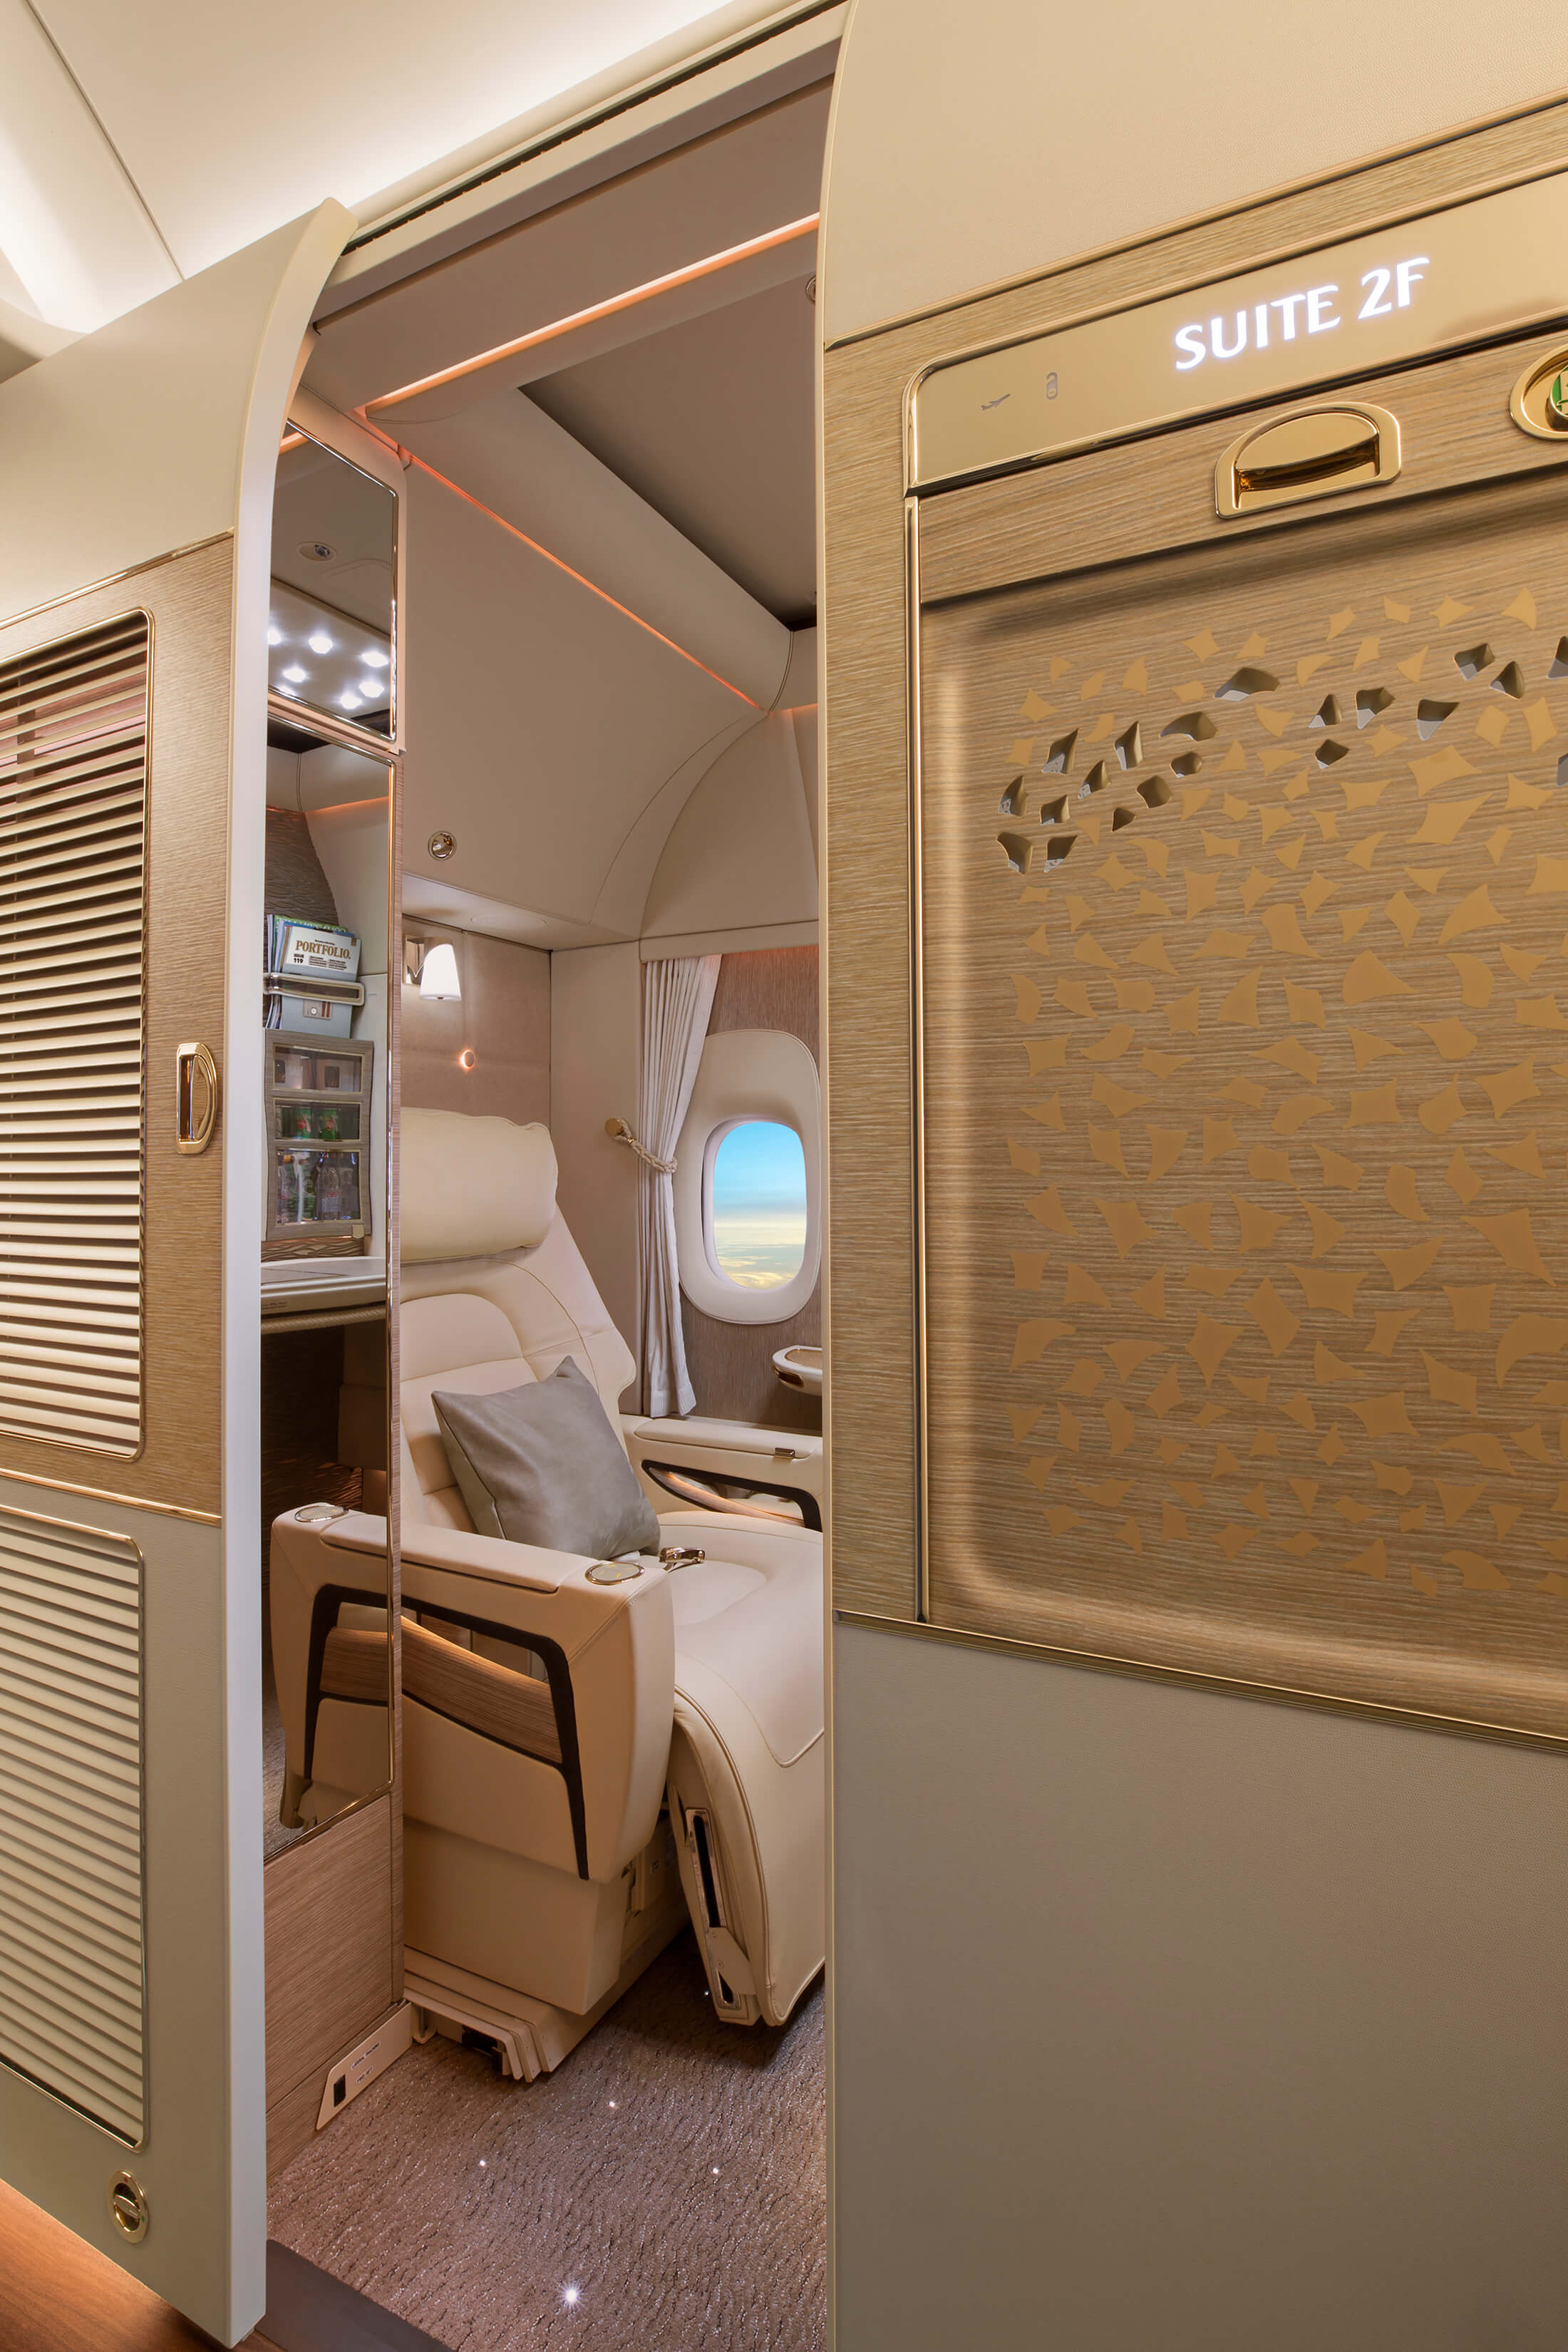 Emirates First Class fully flat bed